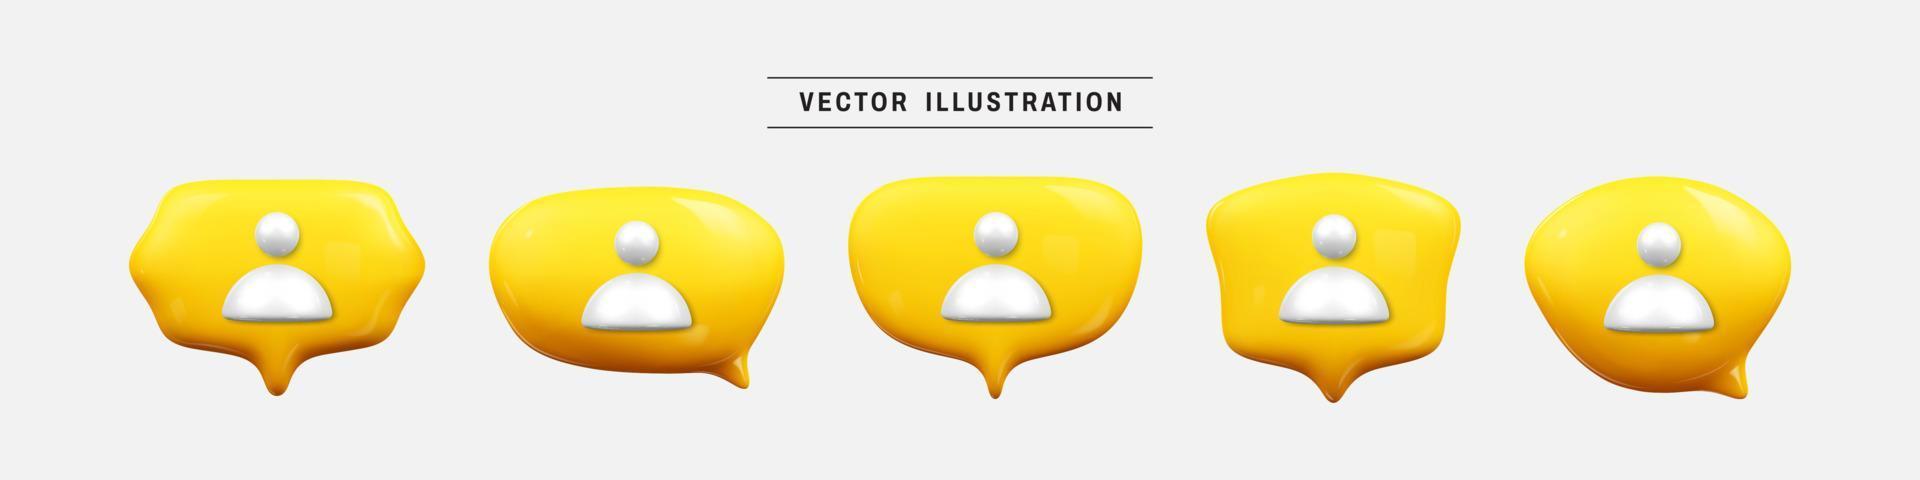 Speech bubble with human profile 3d icon set. realistic design elements collection. vector illustration in cartoon minimal style